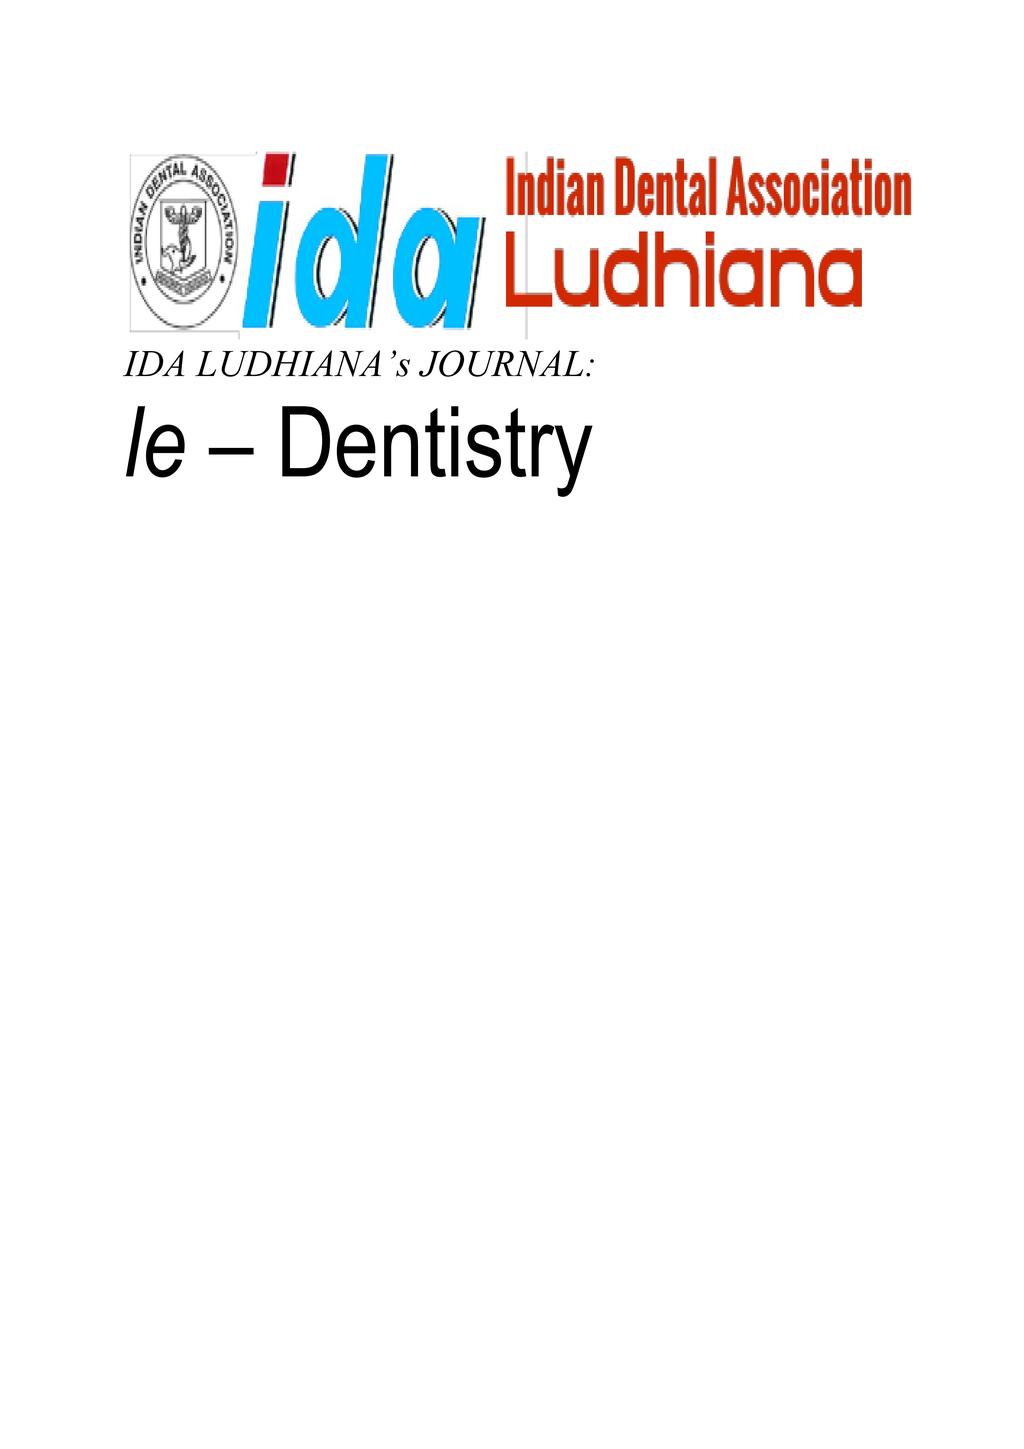 Bhola M and Gera T. Orthodontics for the mixed dentition. Doi:10.21276/ledent.2018.02.